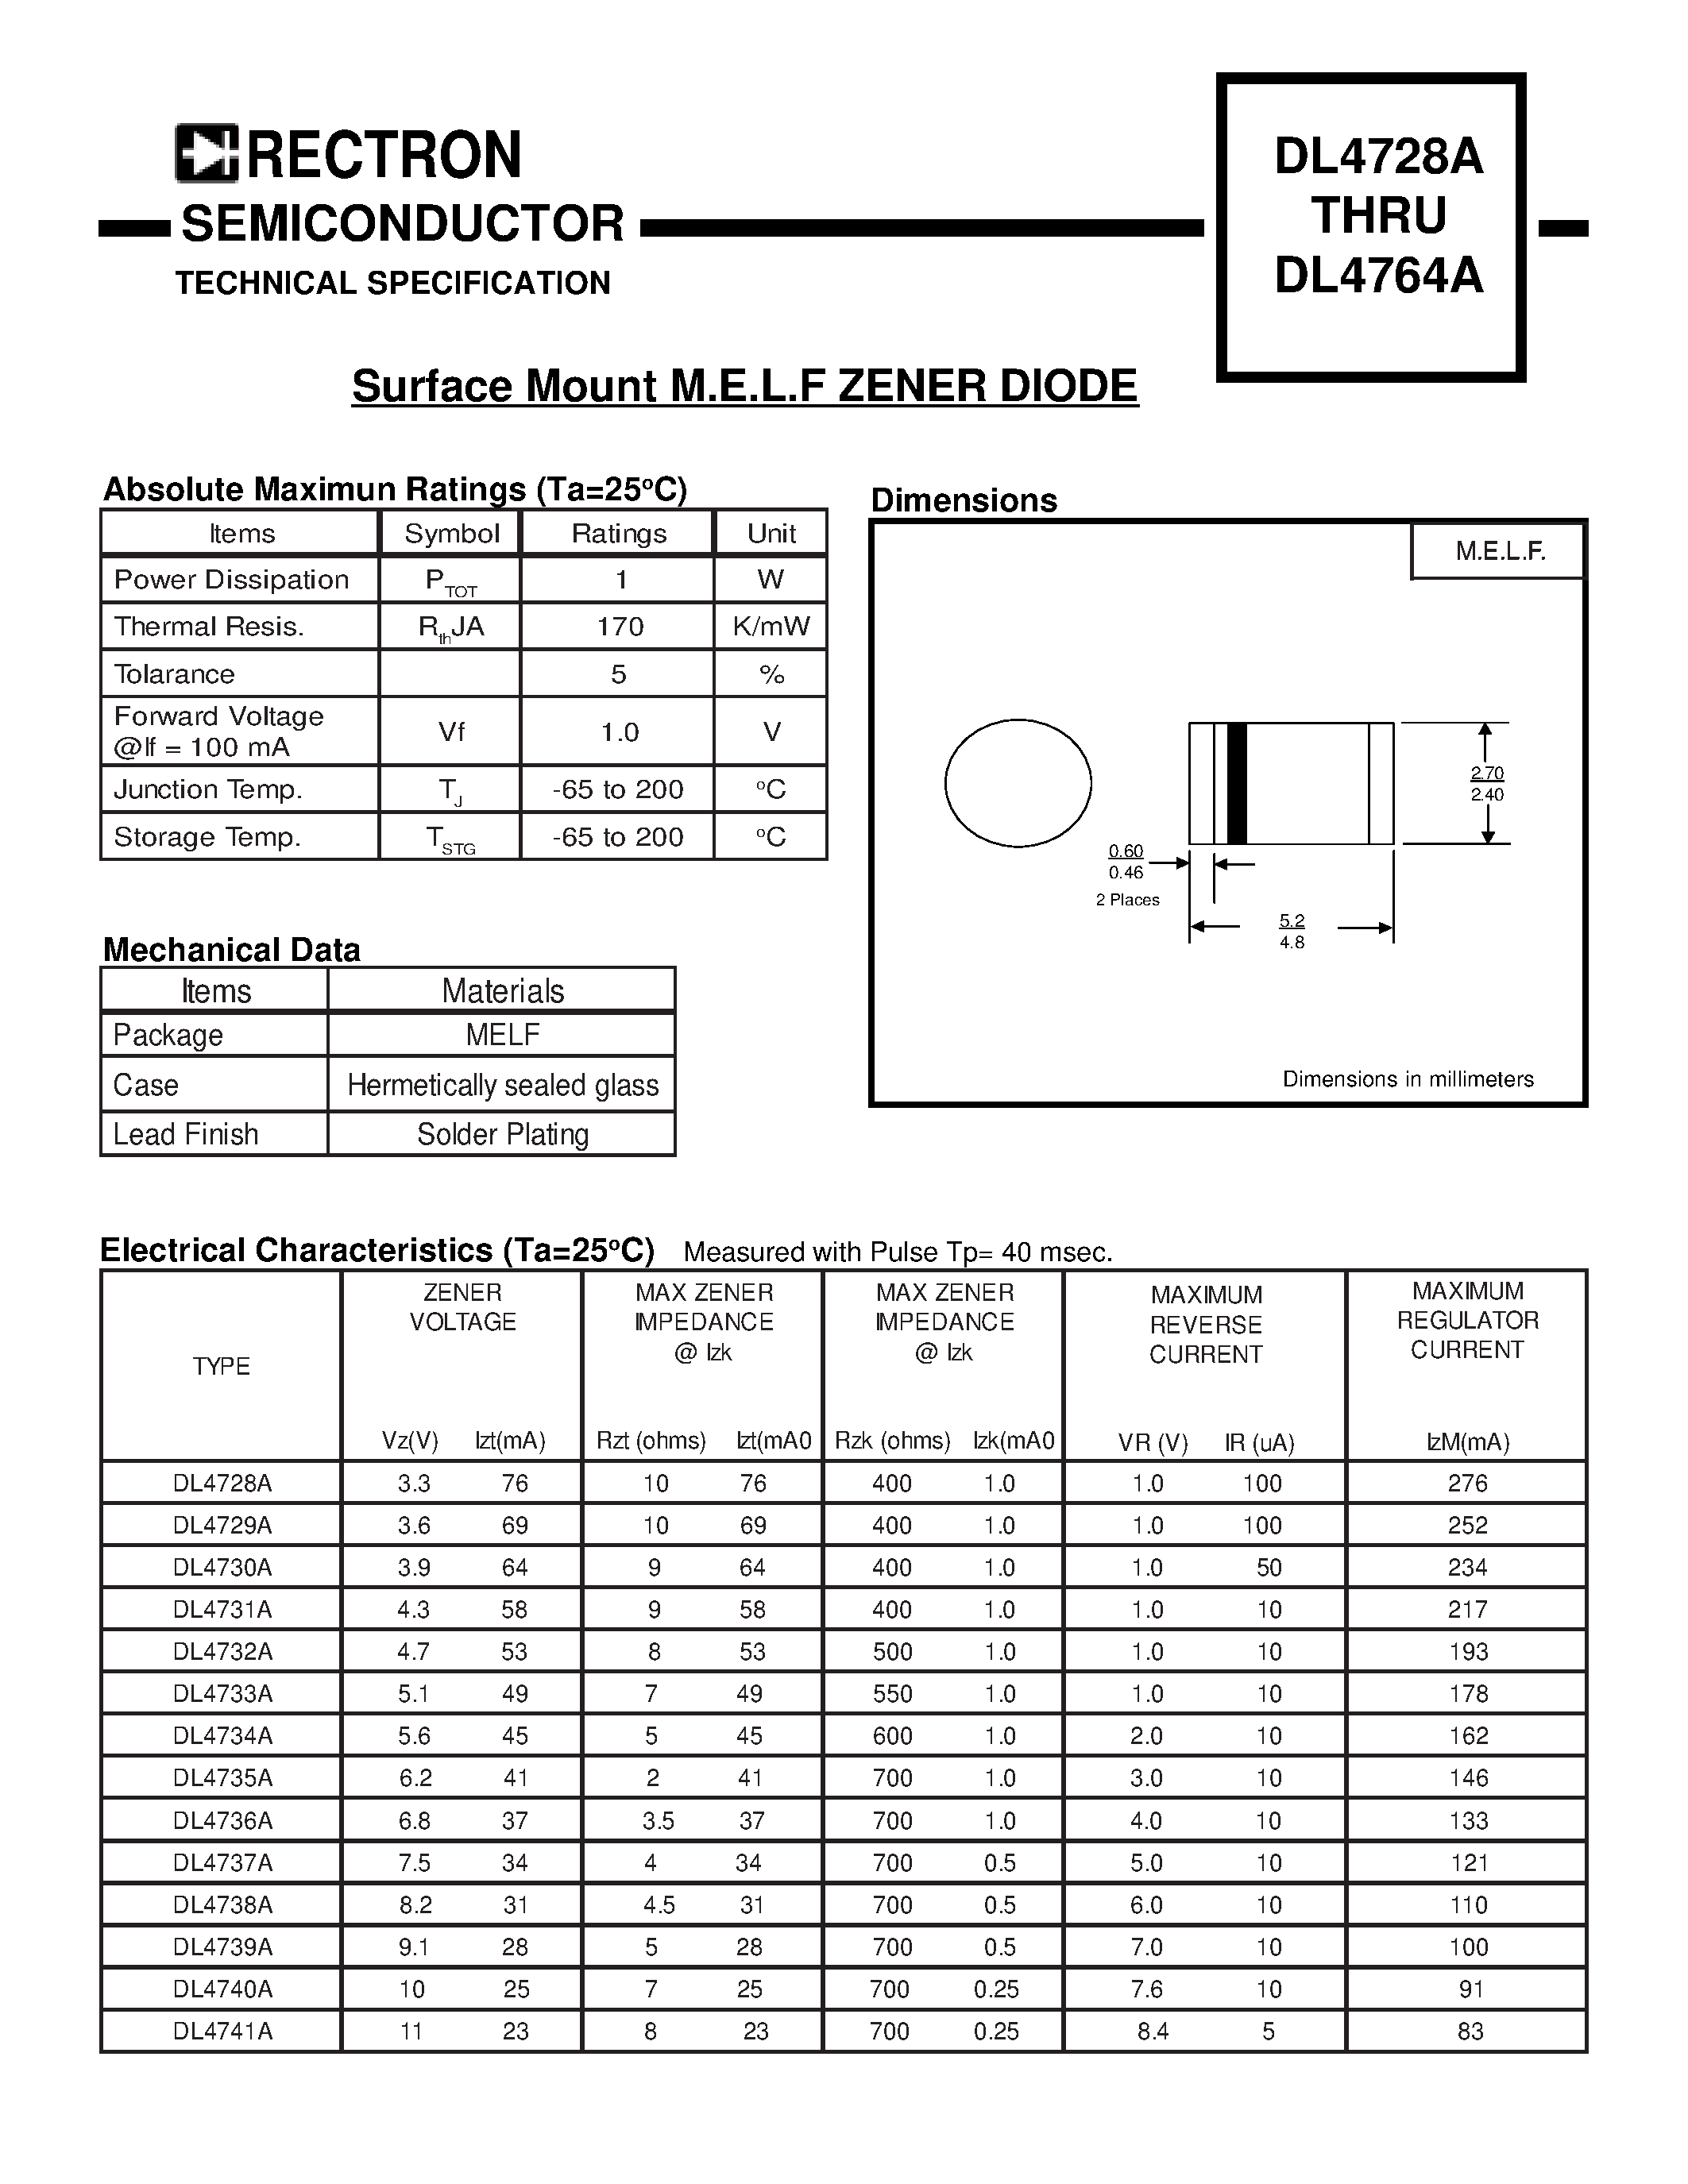 Datasheet DL4756A - Surface Mount M.E.L.F ZENER DIODE page 1